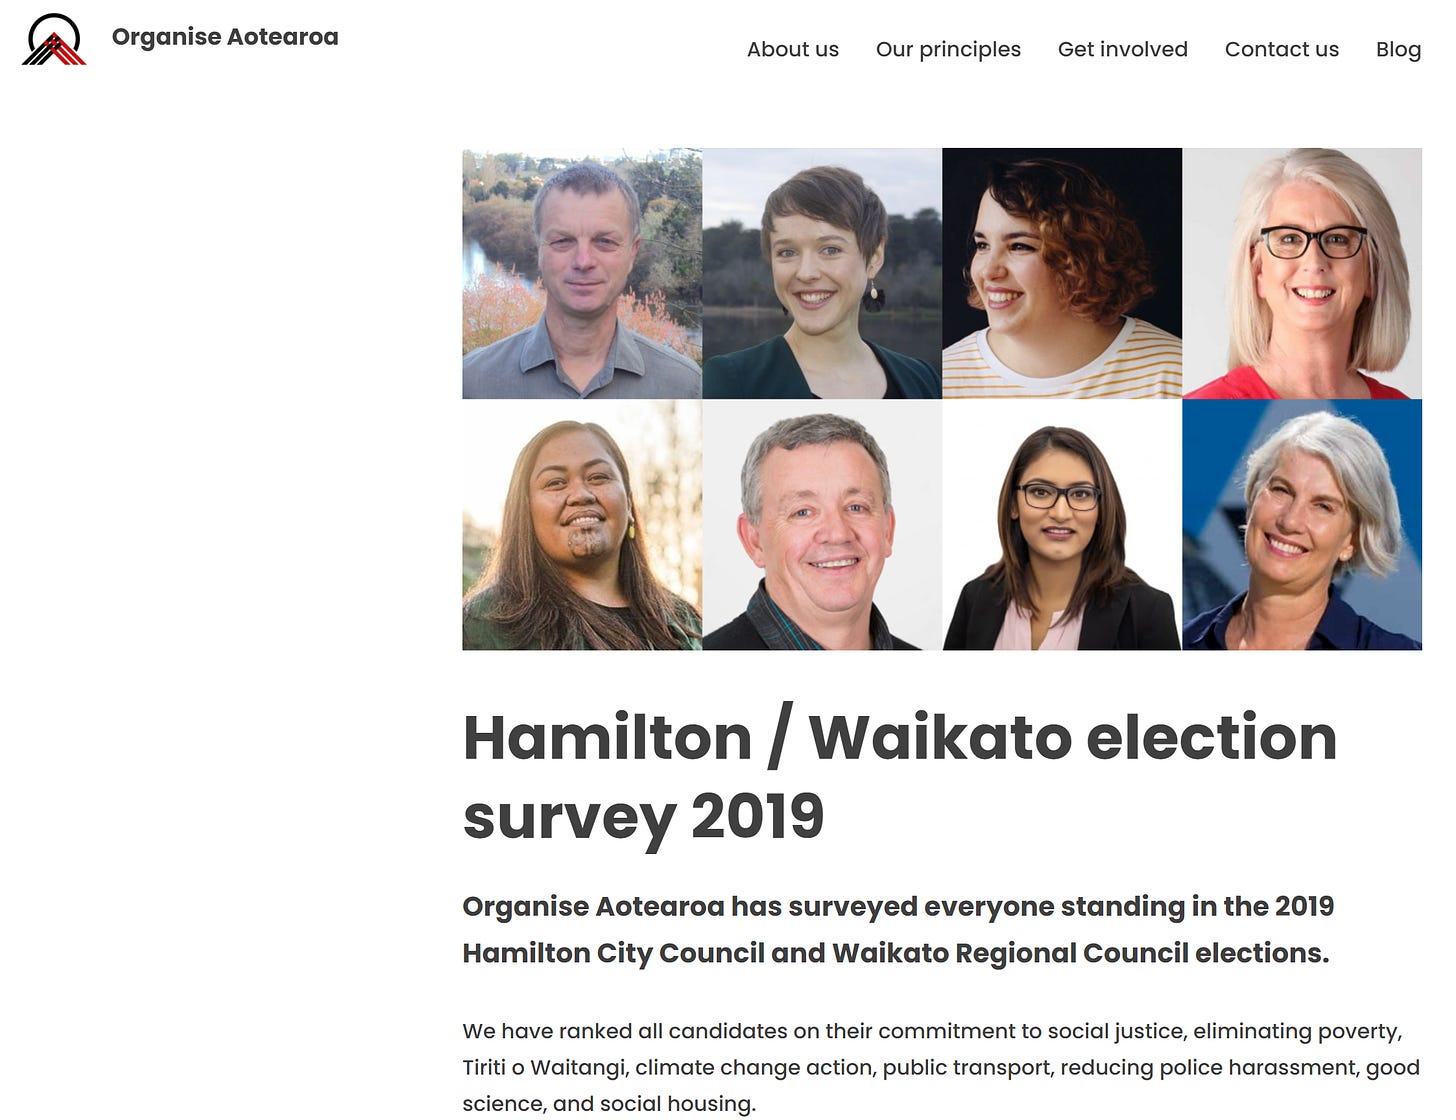 A screenshot of the Organise Aotearoa webpage for the Hamilton / Waikato election survey 2019. It has photographs of 8 candidates and a short blurb explaining the survey. This page is linked below.